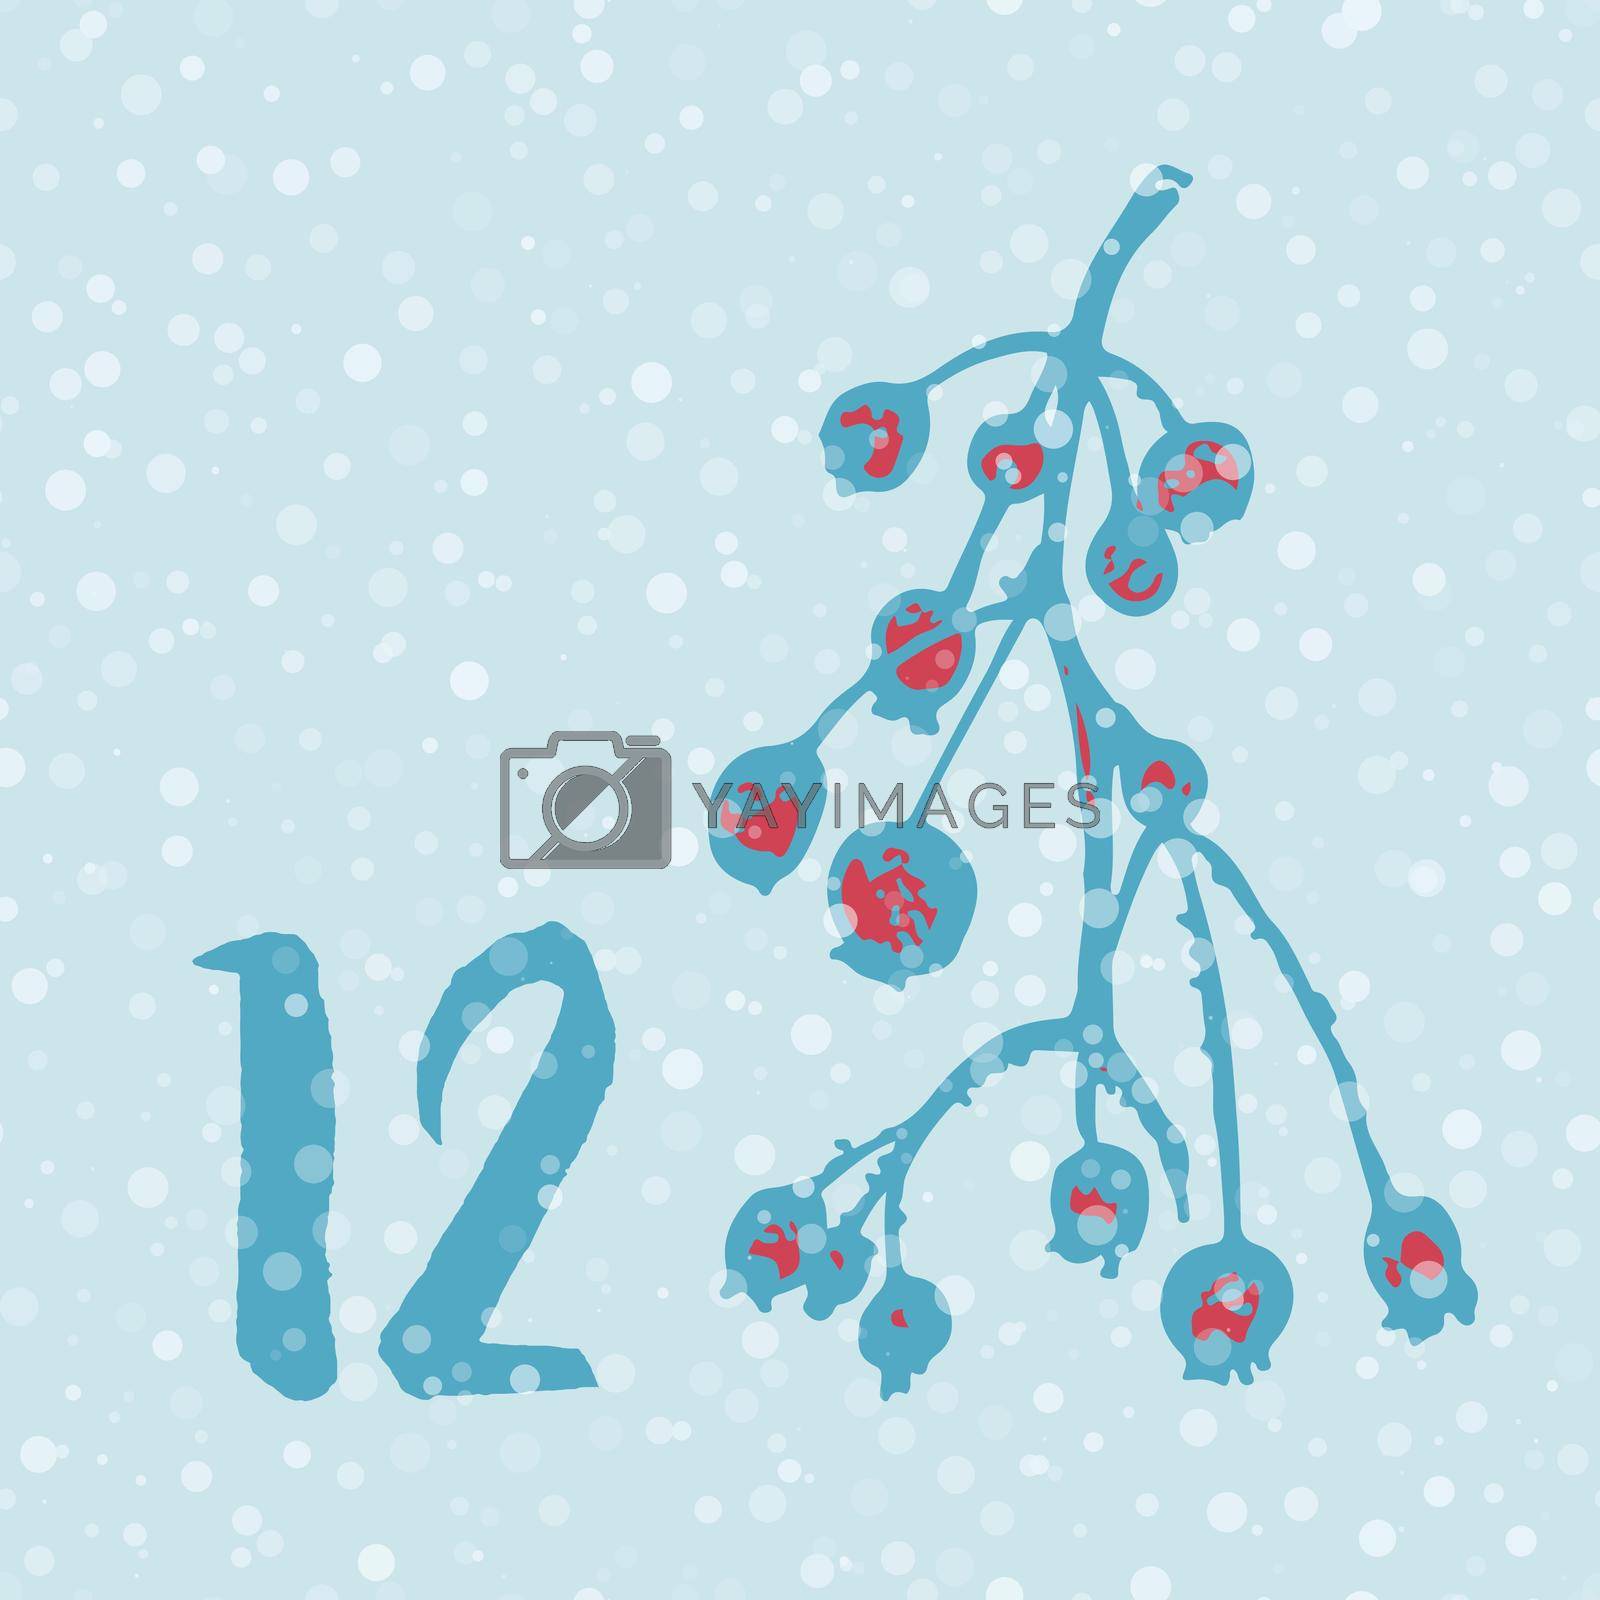 Royalty free image of Page Advent Calendar 25 days of Christmas with space for text. by zimages